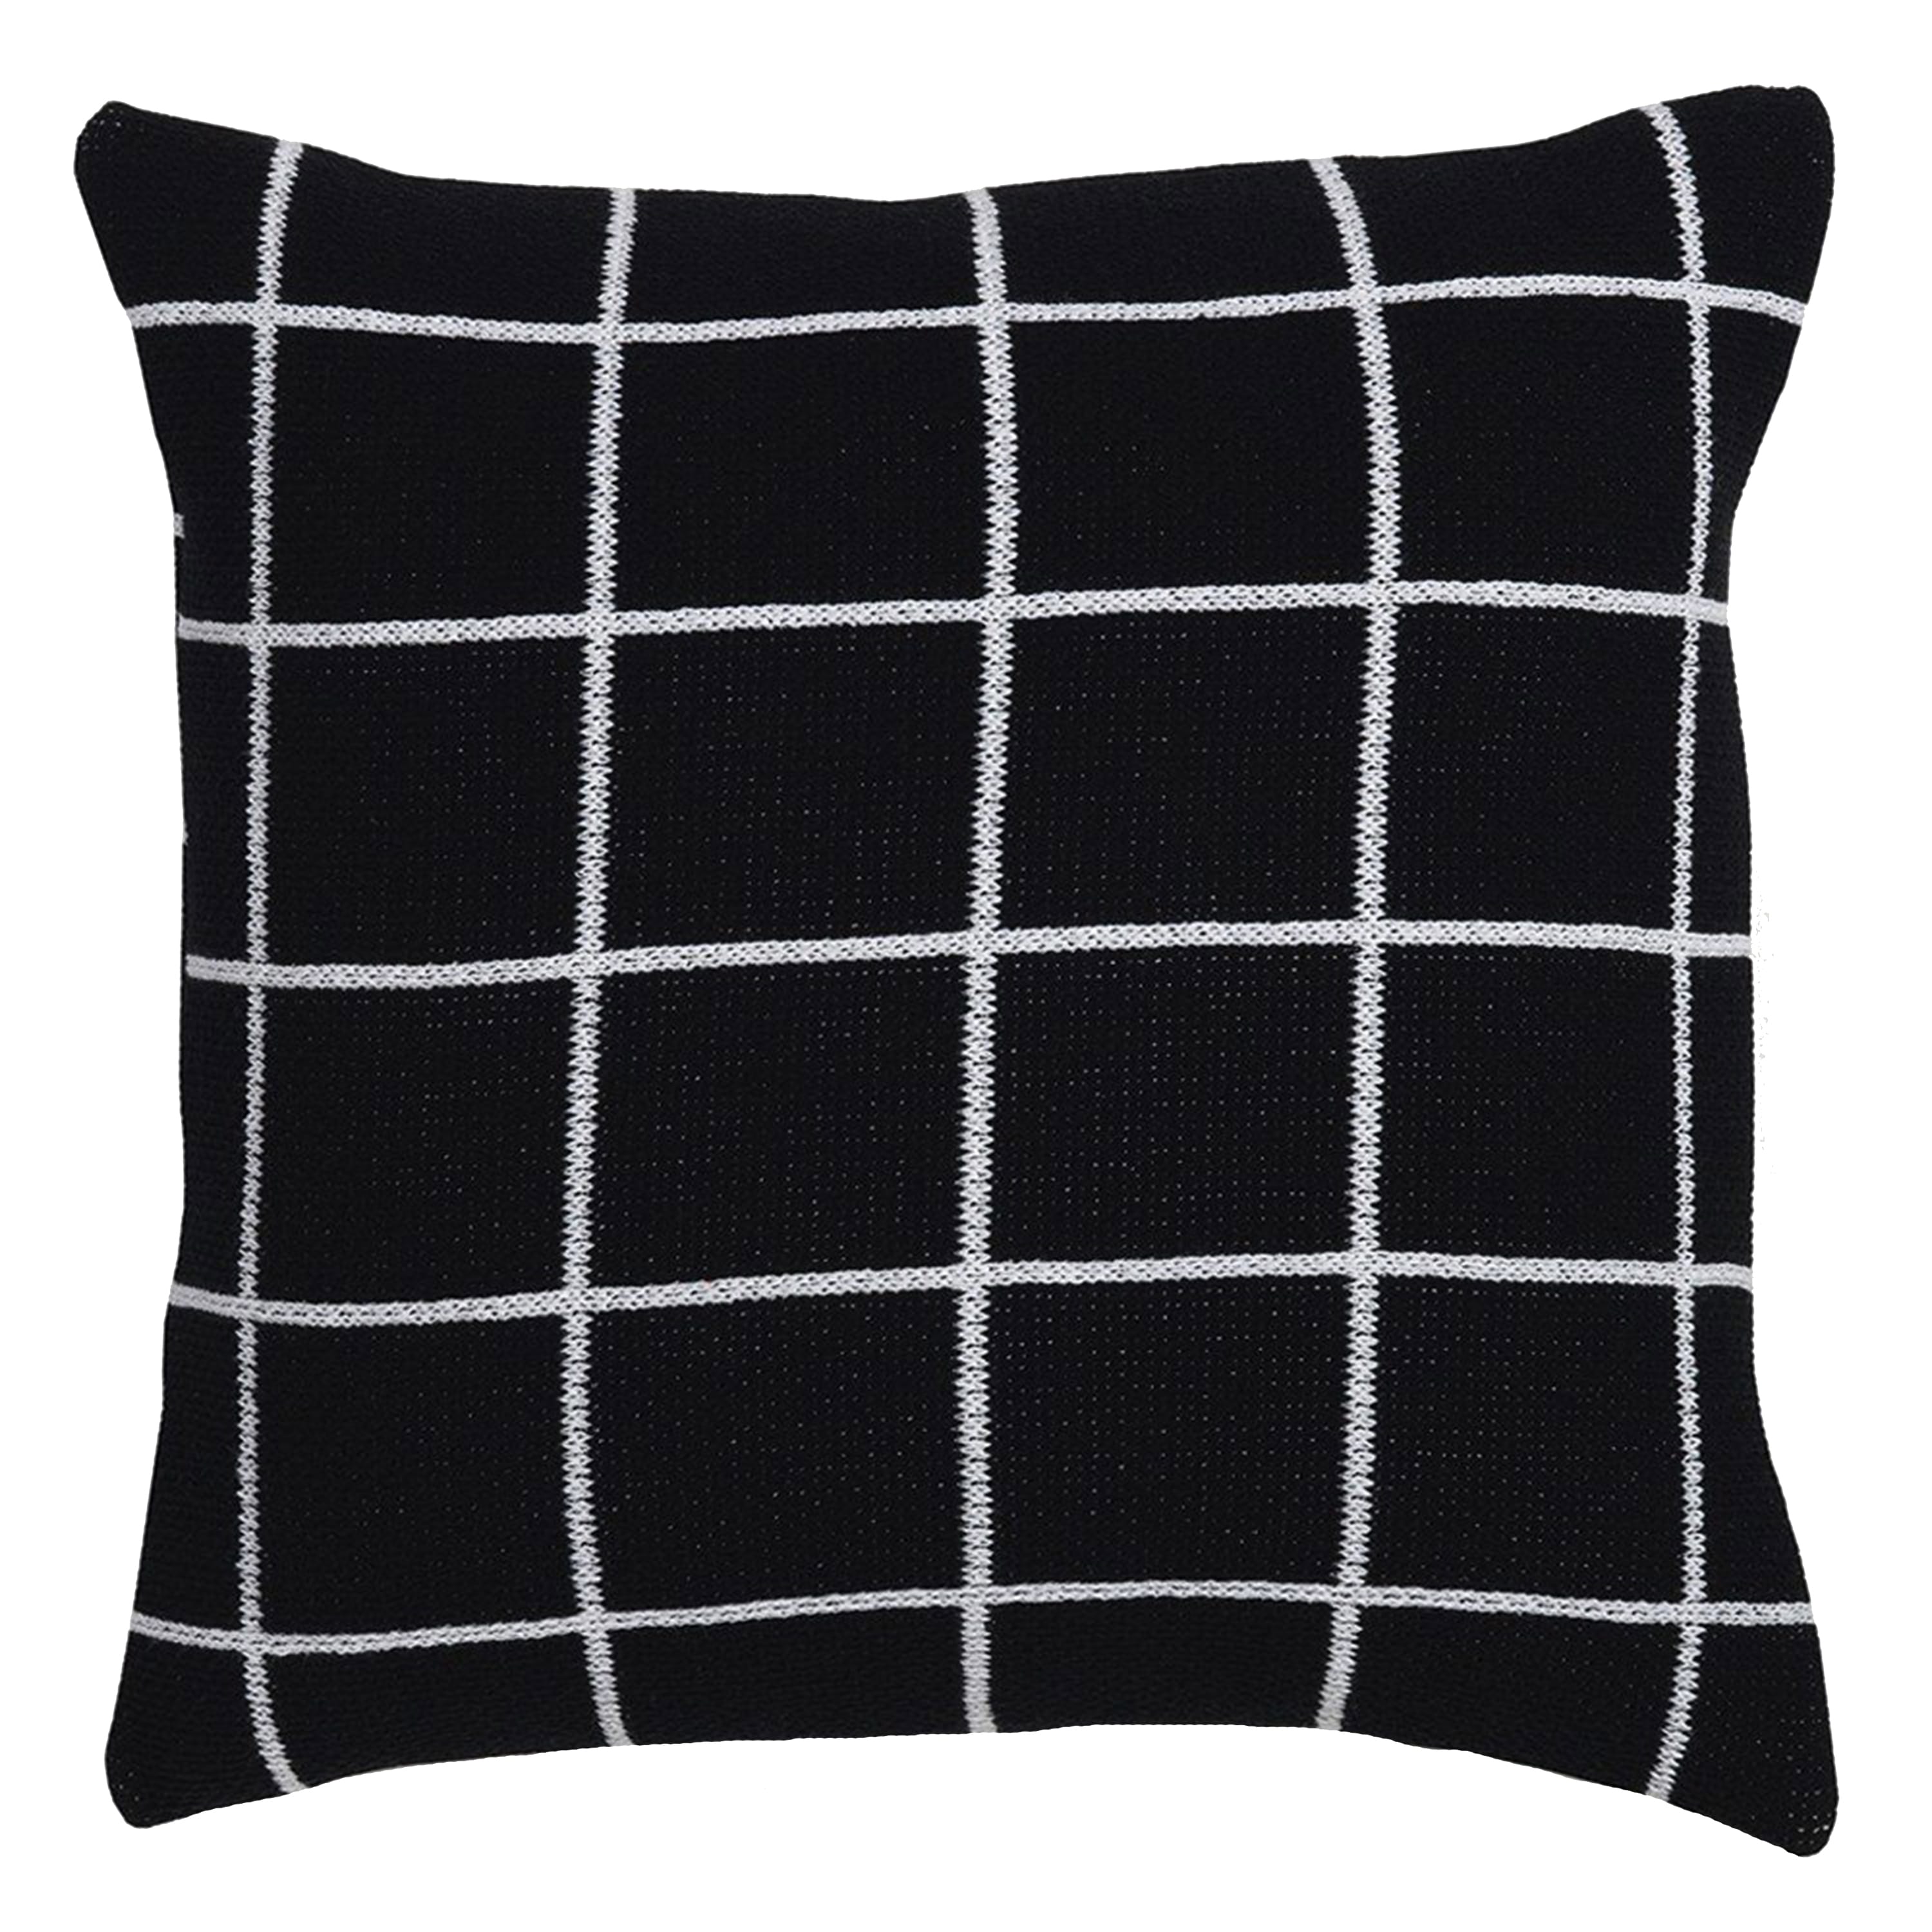 From top: The grid black knit throw pillow from Unison costs $65. The CB2 reversible Prim pillow, $34.95. The black Zardozi Kandhari pillow, $49.